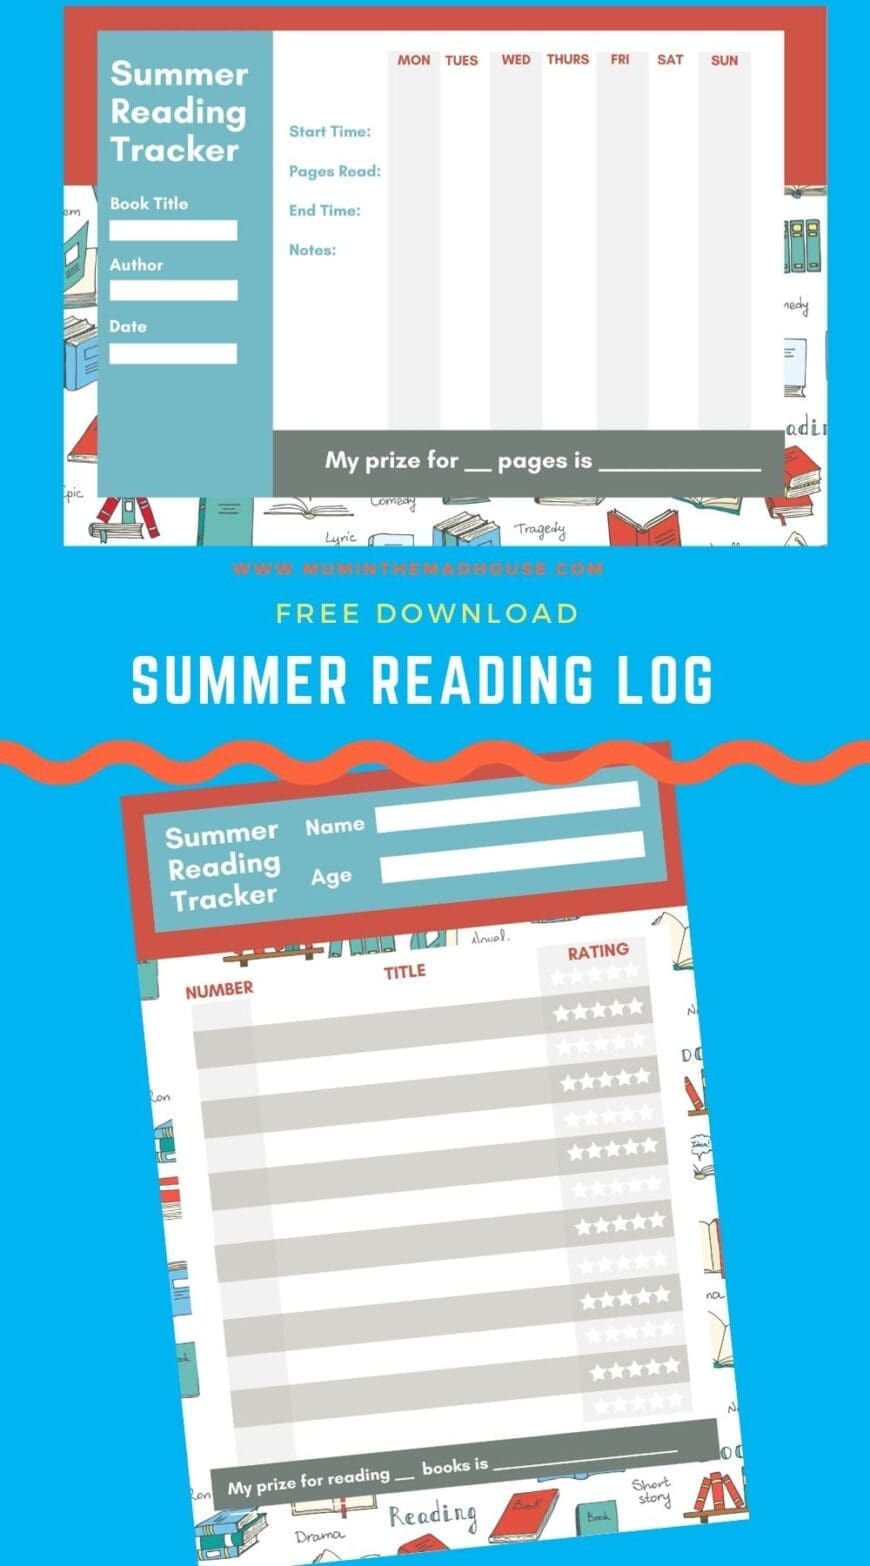 Free summer reading log printable that will inspire kids to read. Instead of giving your kids a list of books, provide them with our printables and set them a Summer Reading Challenge.